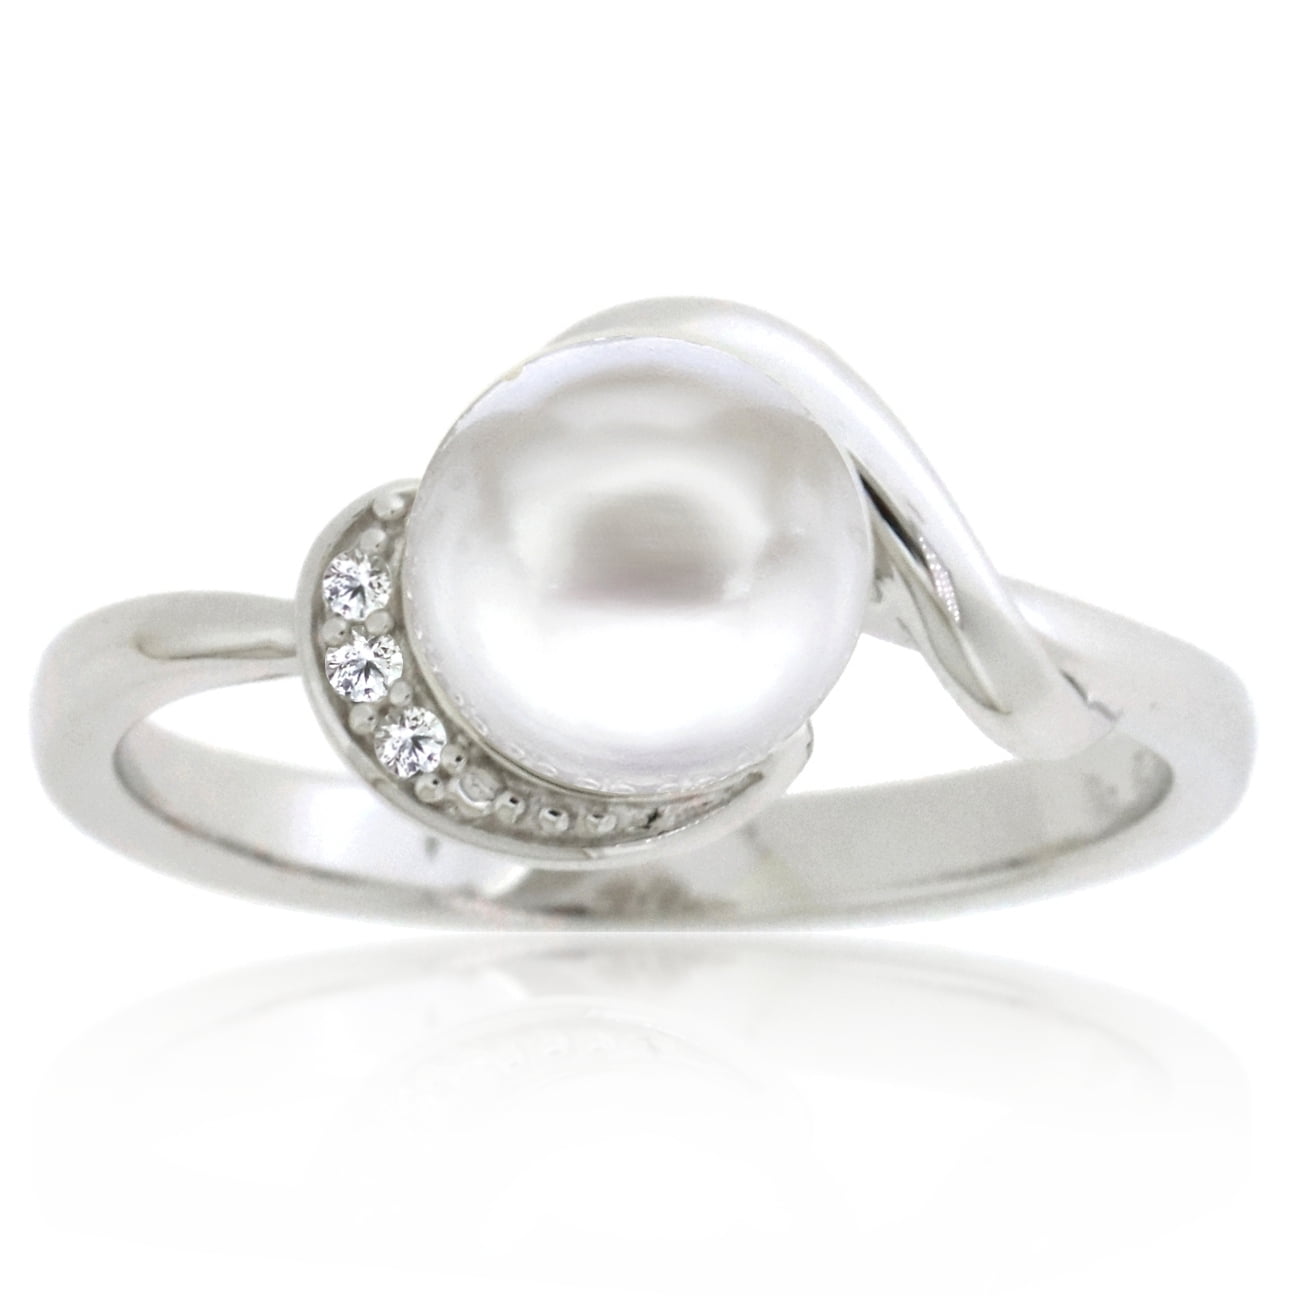 Large genuine freshwater pearl and sterling silver ring modern spiral rings natural pearl woman's ring wedding jewelry silver swirl ring